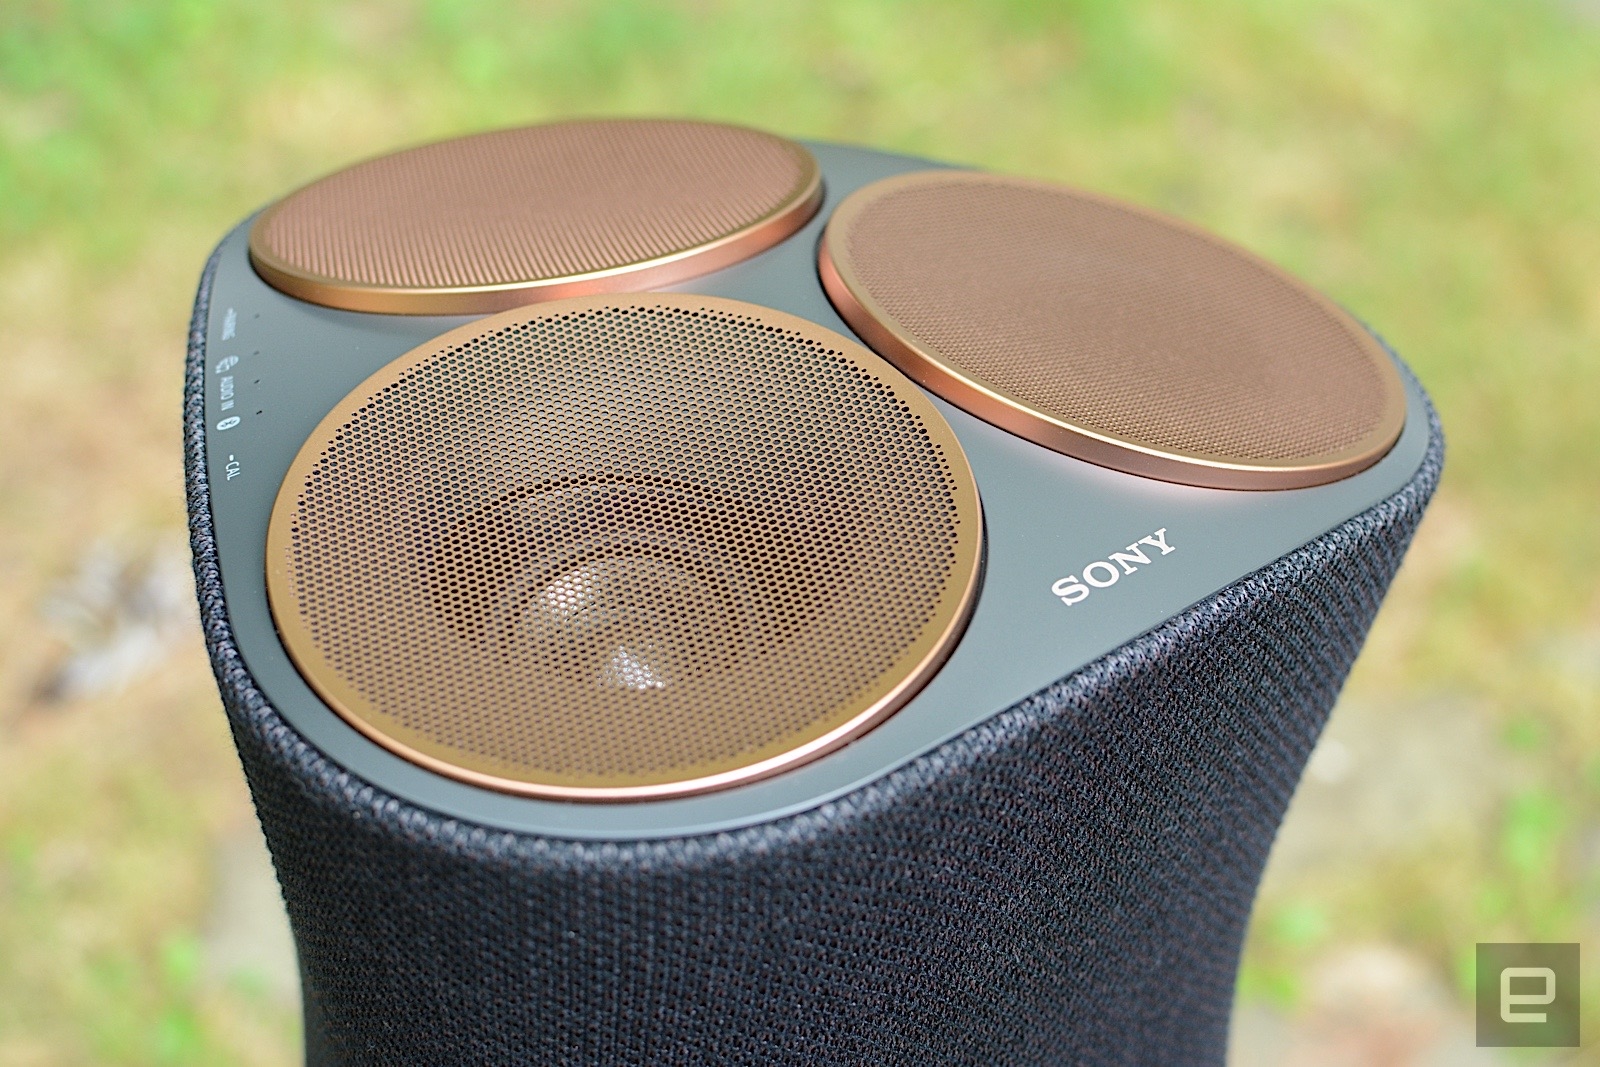 Sony SRS-RA5000 review: 360 Reality Audio is only part of the story | DeviceDaily.com